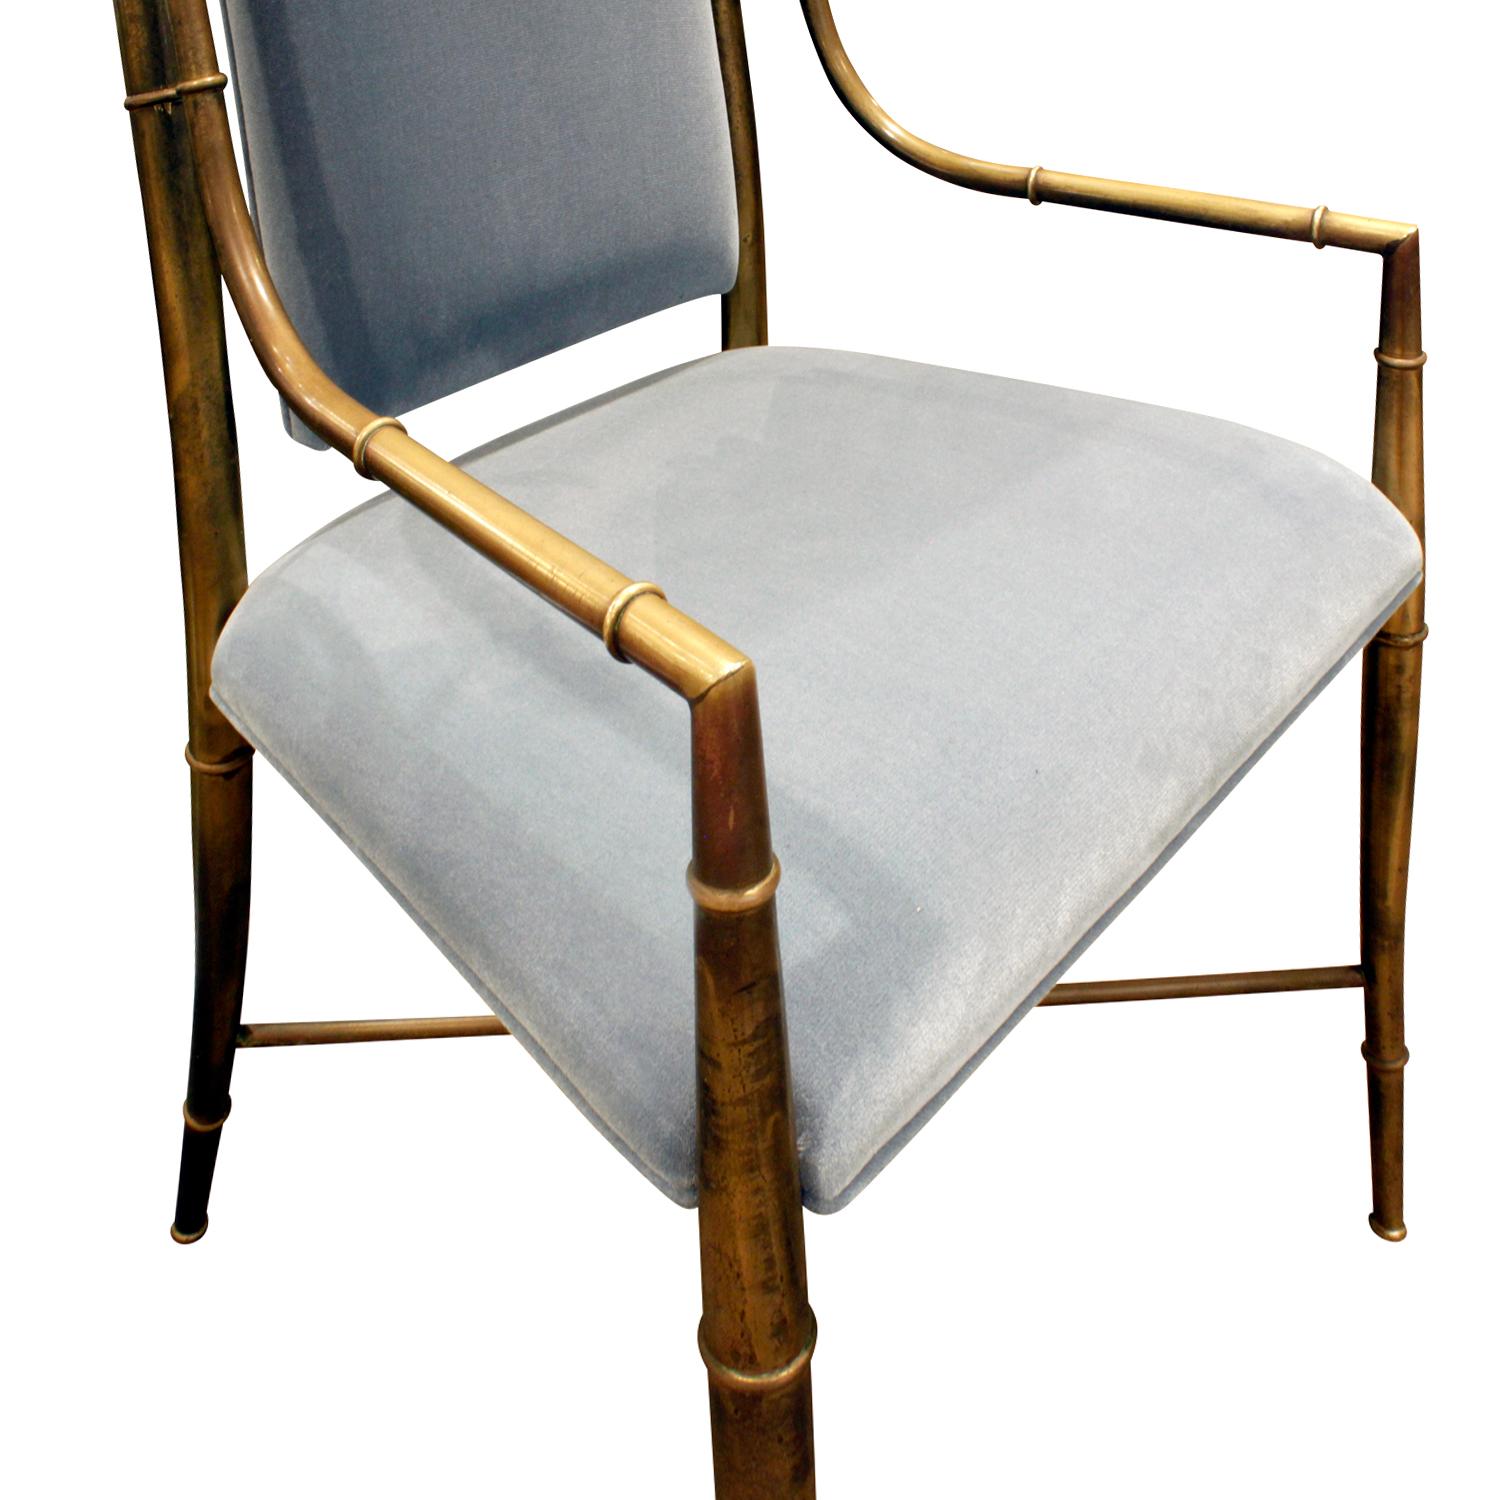 Hand-Crafted Mastercraft Elegant Chair with Bronze Frame with Bamboo Motif 1970s